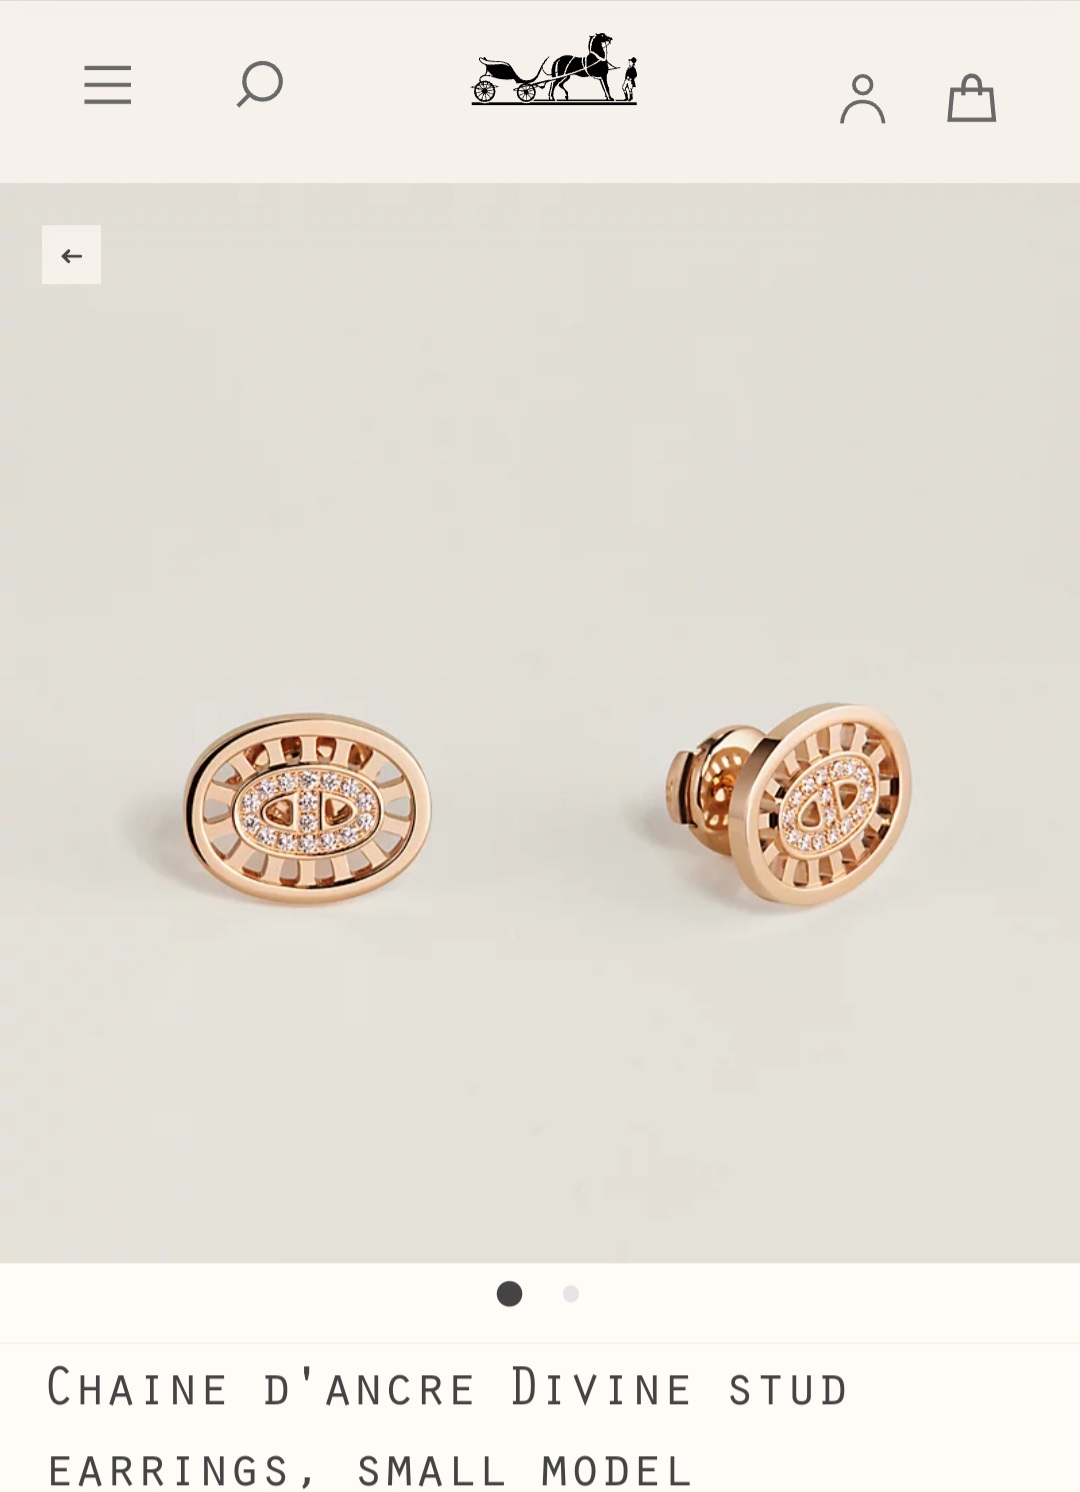 Hermes Chaine d’ancre Divine stud earrings